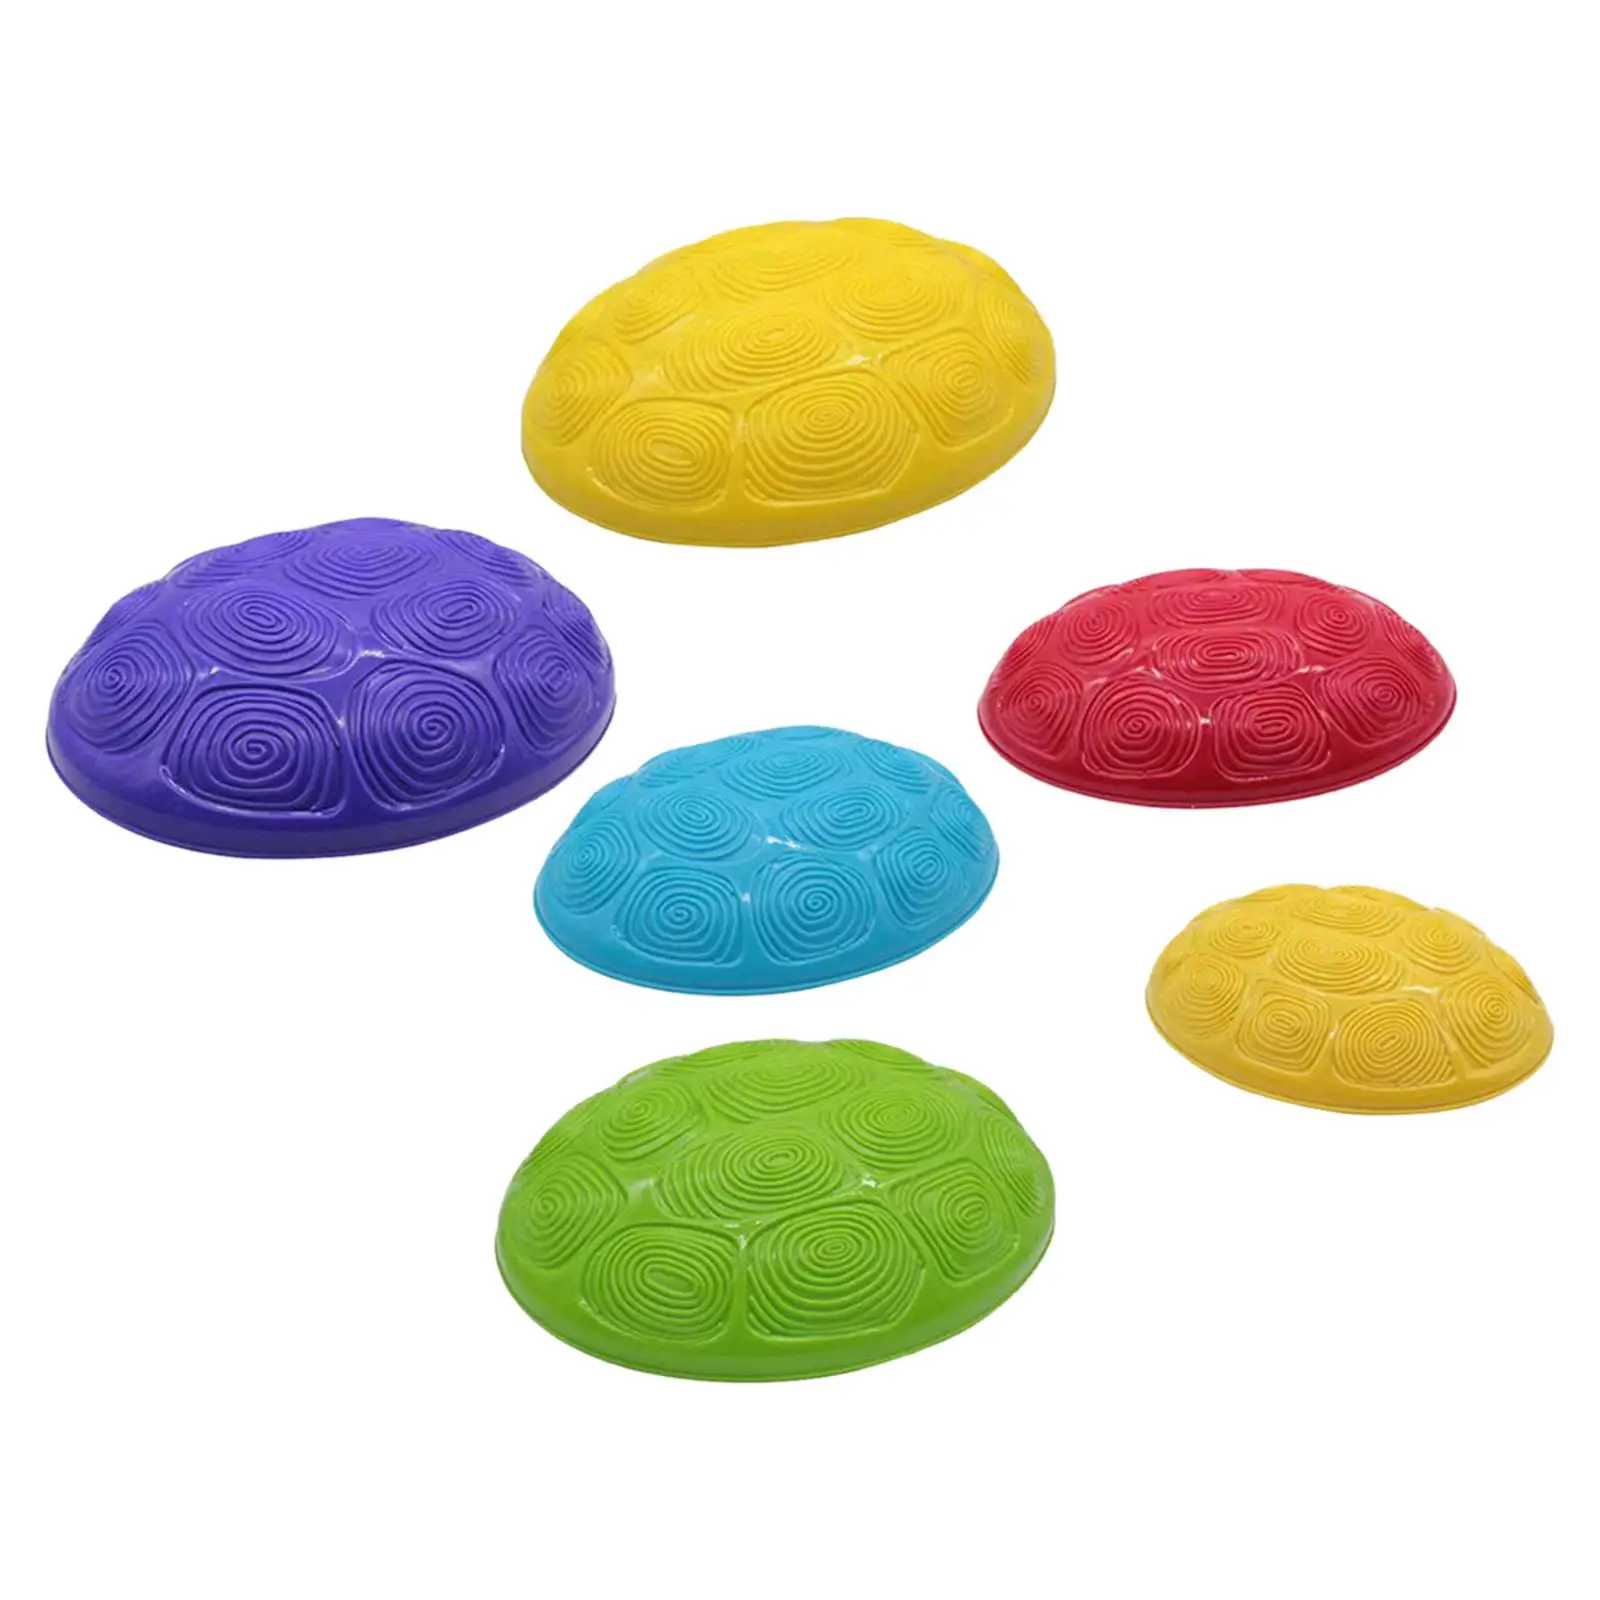 6Pcs Balance Stepping stone Turtle jump stone Sensory Toys Coordination Gross Motor Development Durable for Indoor family